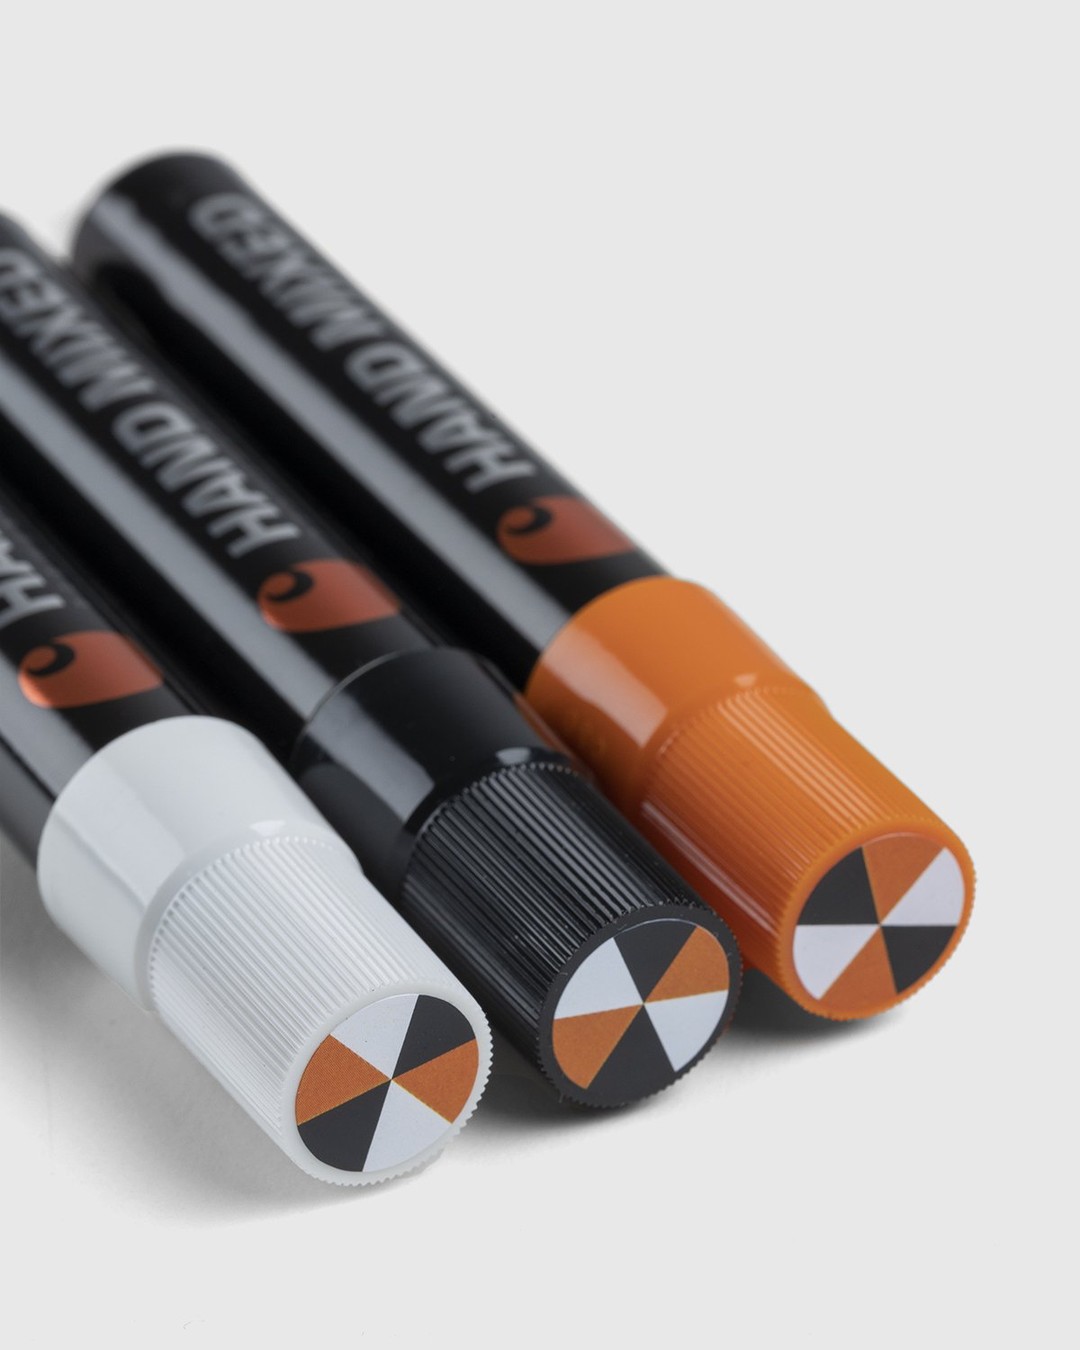 Carhartt WIP – Hand Mixed Solid Marker Multi 3 Set - Pens - Multi - Image 3